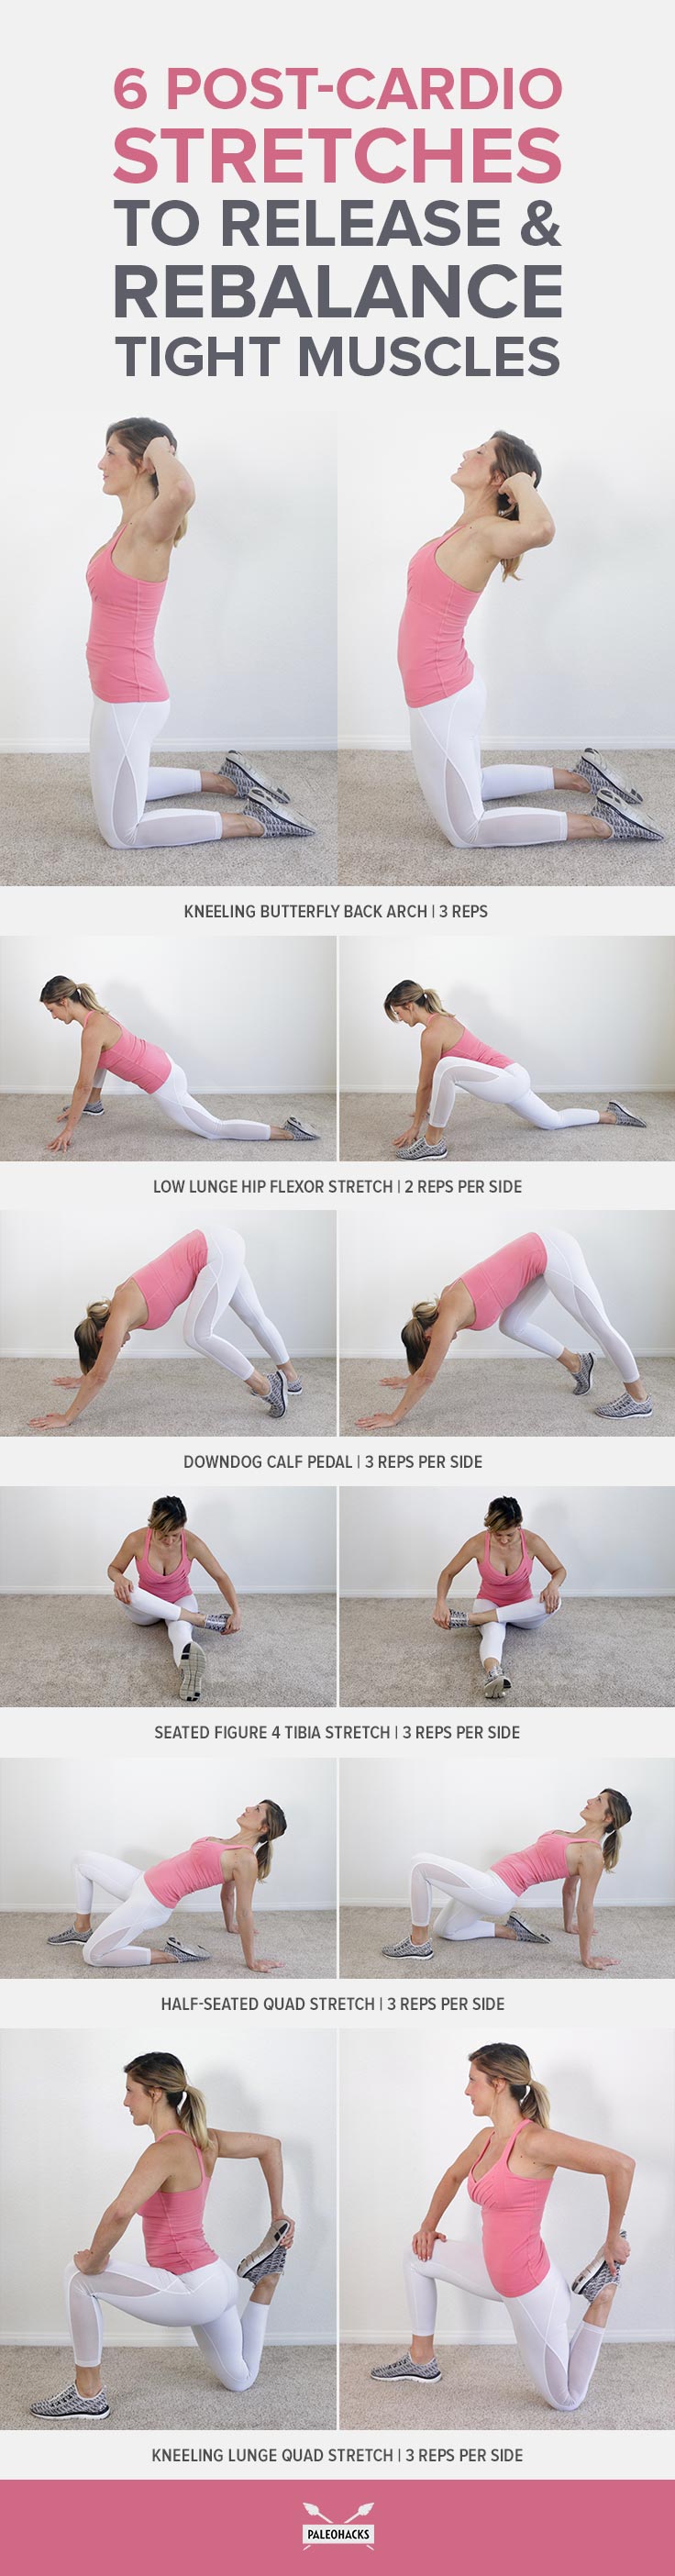 Don’t skip the cooldown! Finish each and every cardio workout with these essential stretches to rebalance your body. Get your body back in balance ASAP.